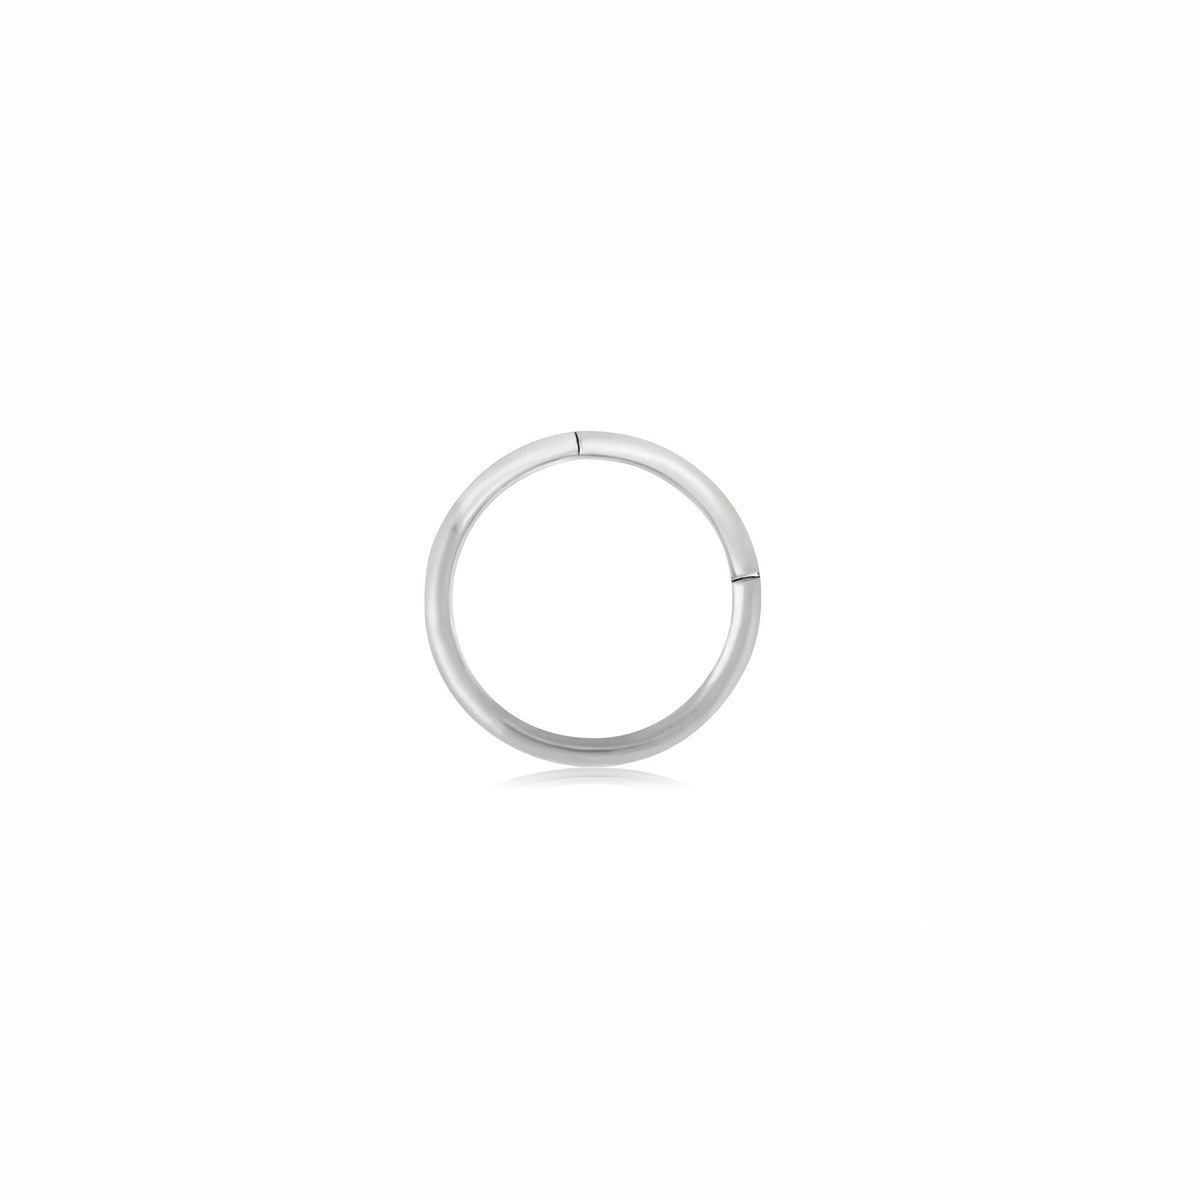 Hinge Ring 1.2mm in Silver